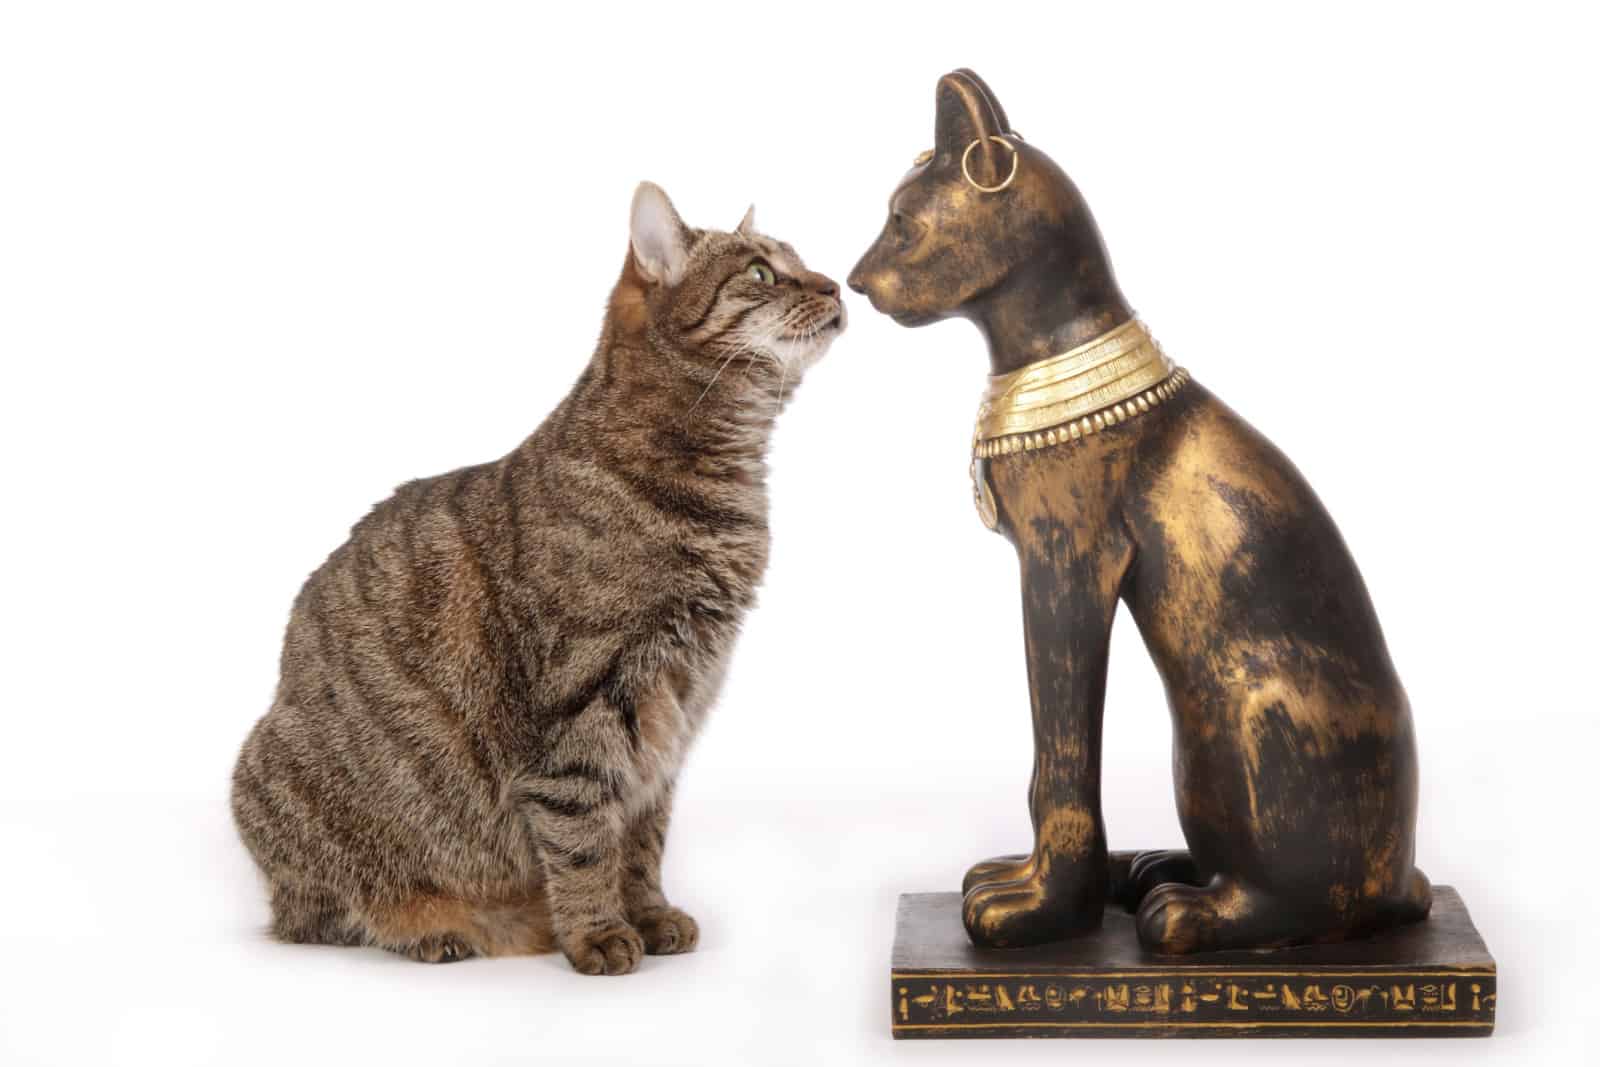 replica of a statue of the Egyptian cat goddess Bastet in front of a real European tabby cat